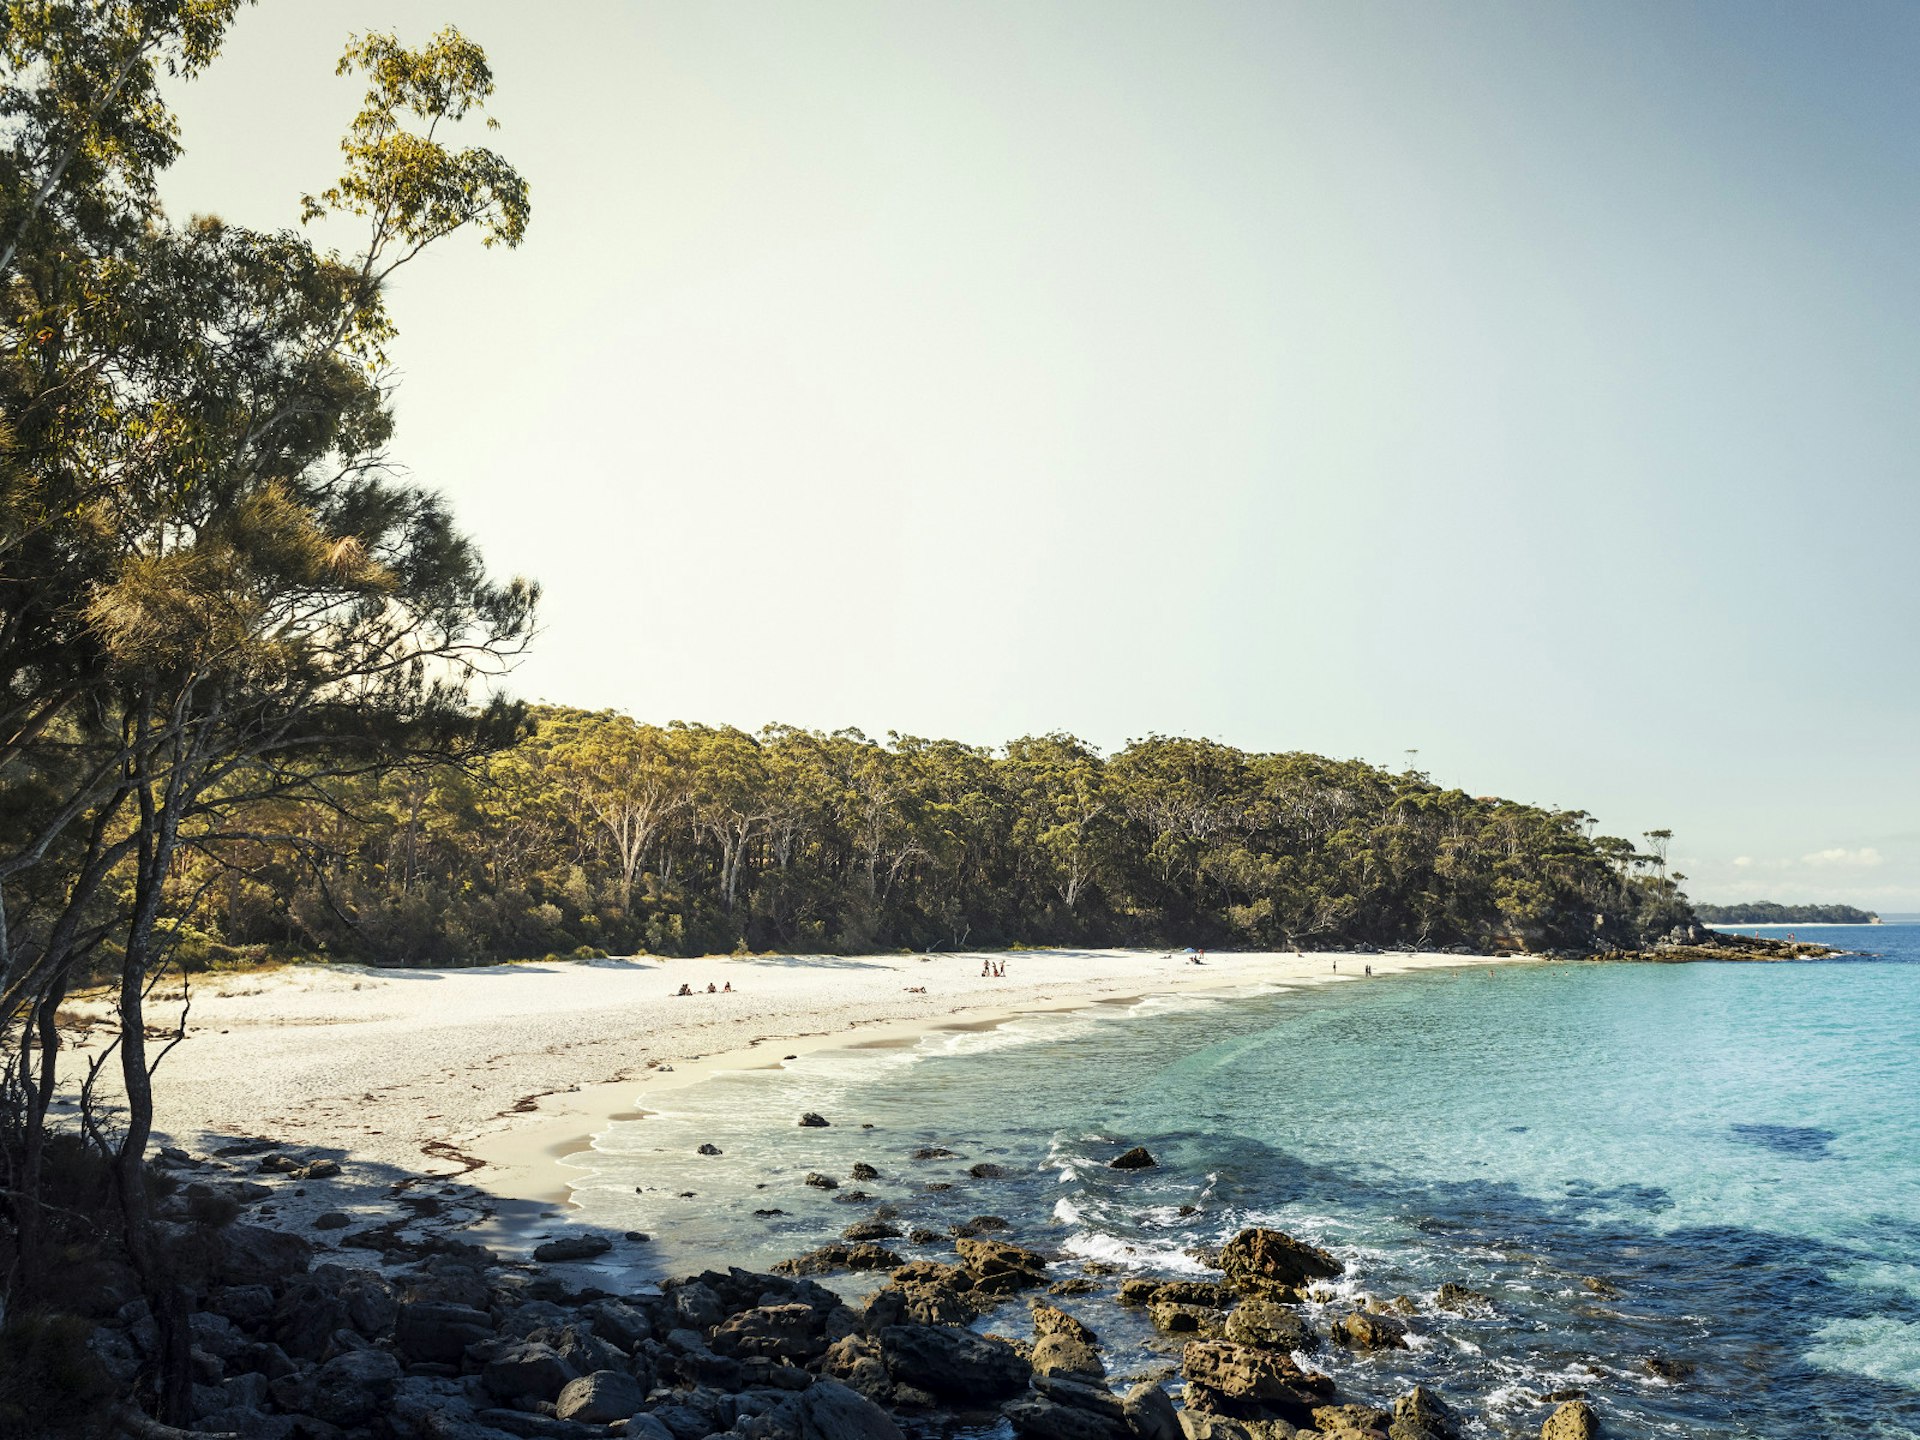 Greenfield Beach in Jervis National Park backed by a forest of gum trees